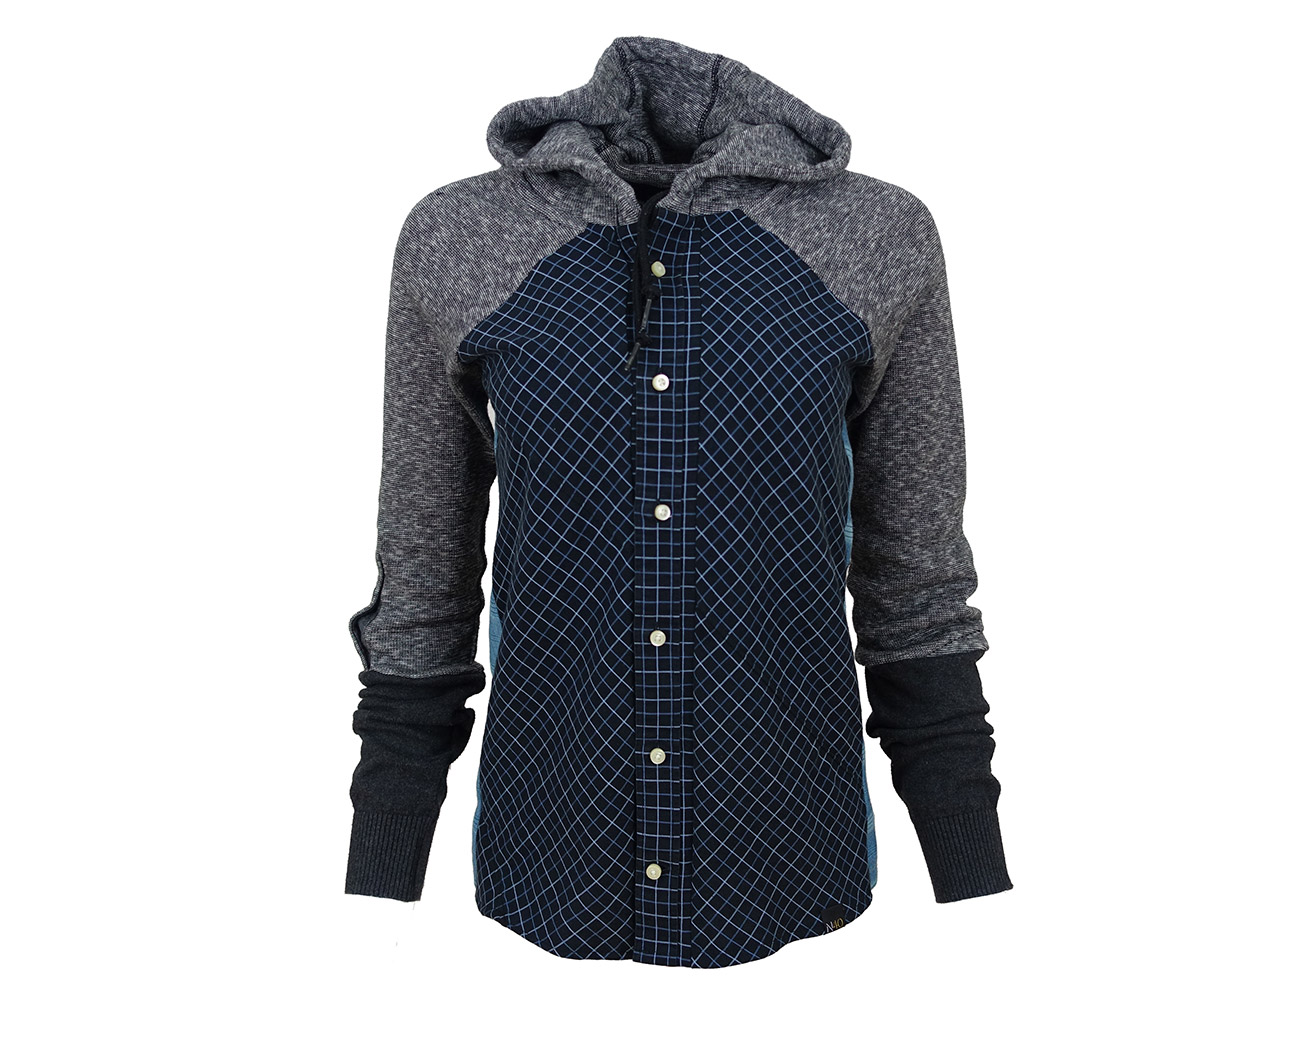 (SOLD) Gray and blue hoodie/bias cut button down shirt hybrid with side ...